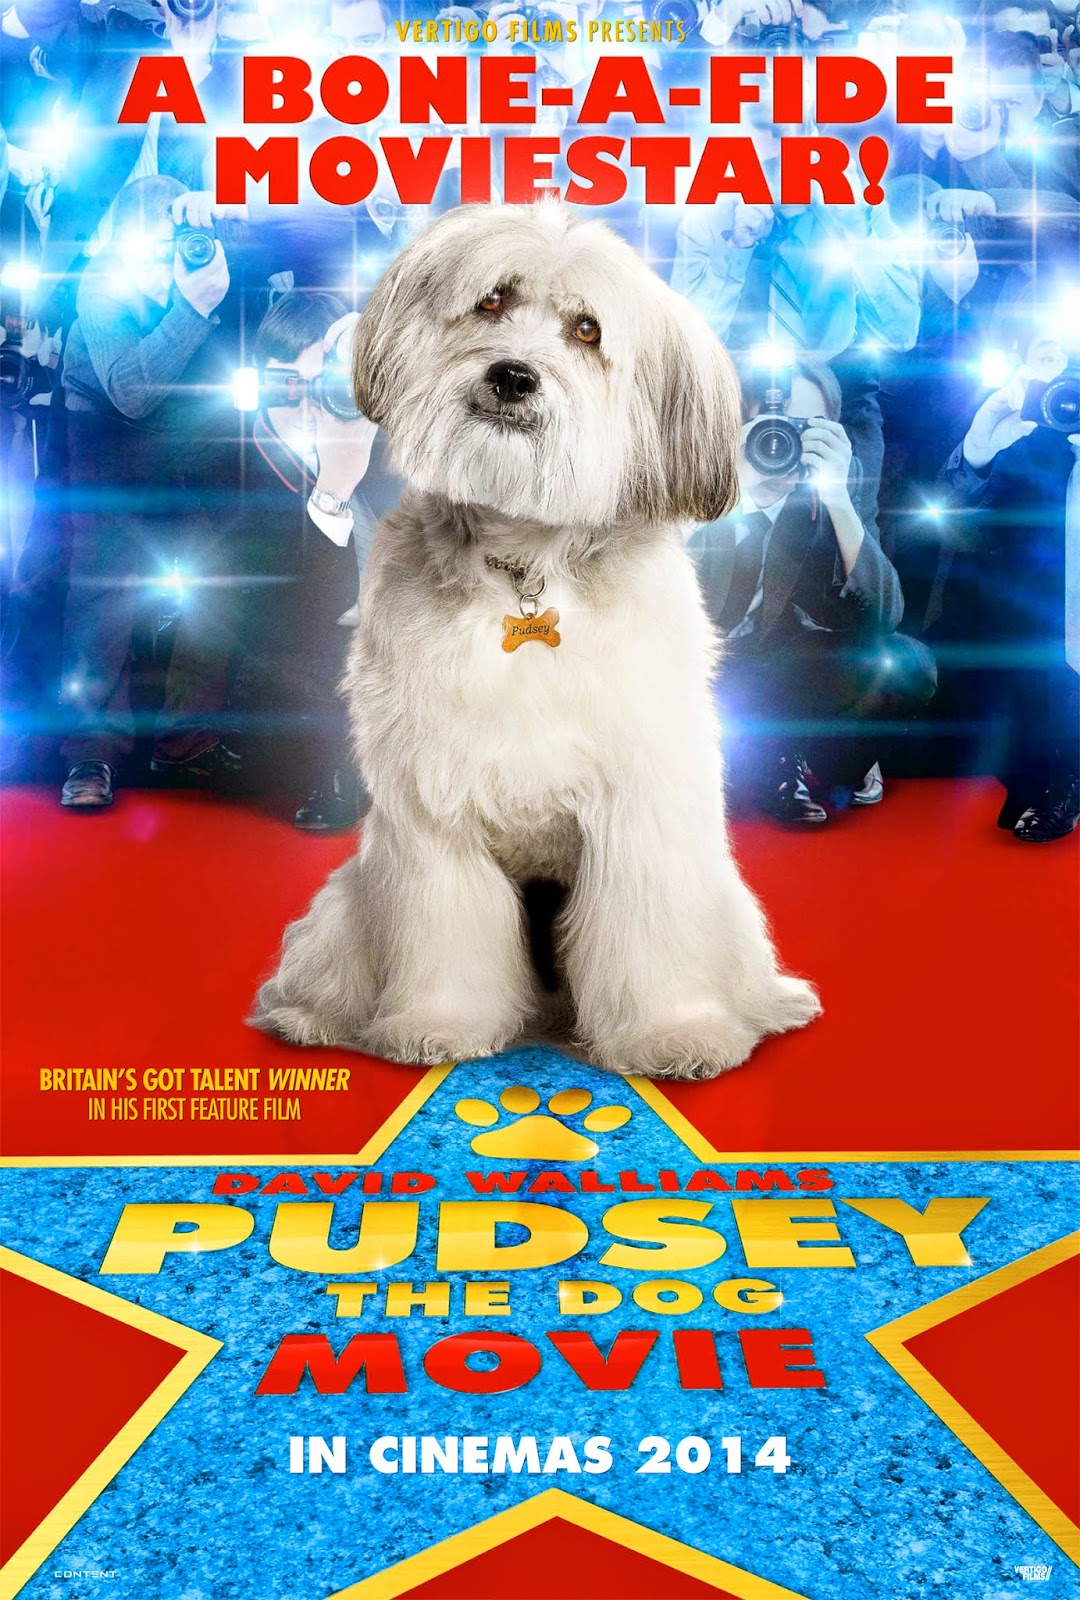 Pudsey: The Movie